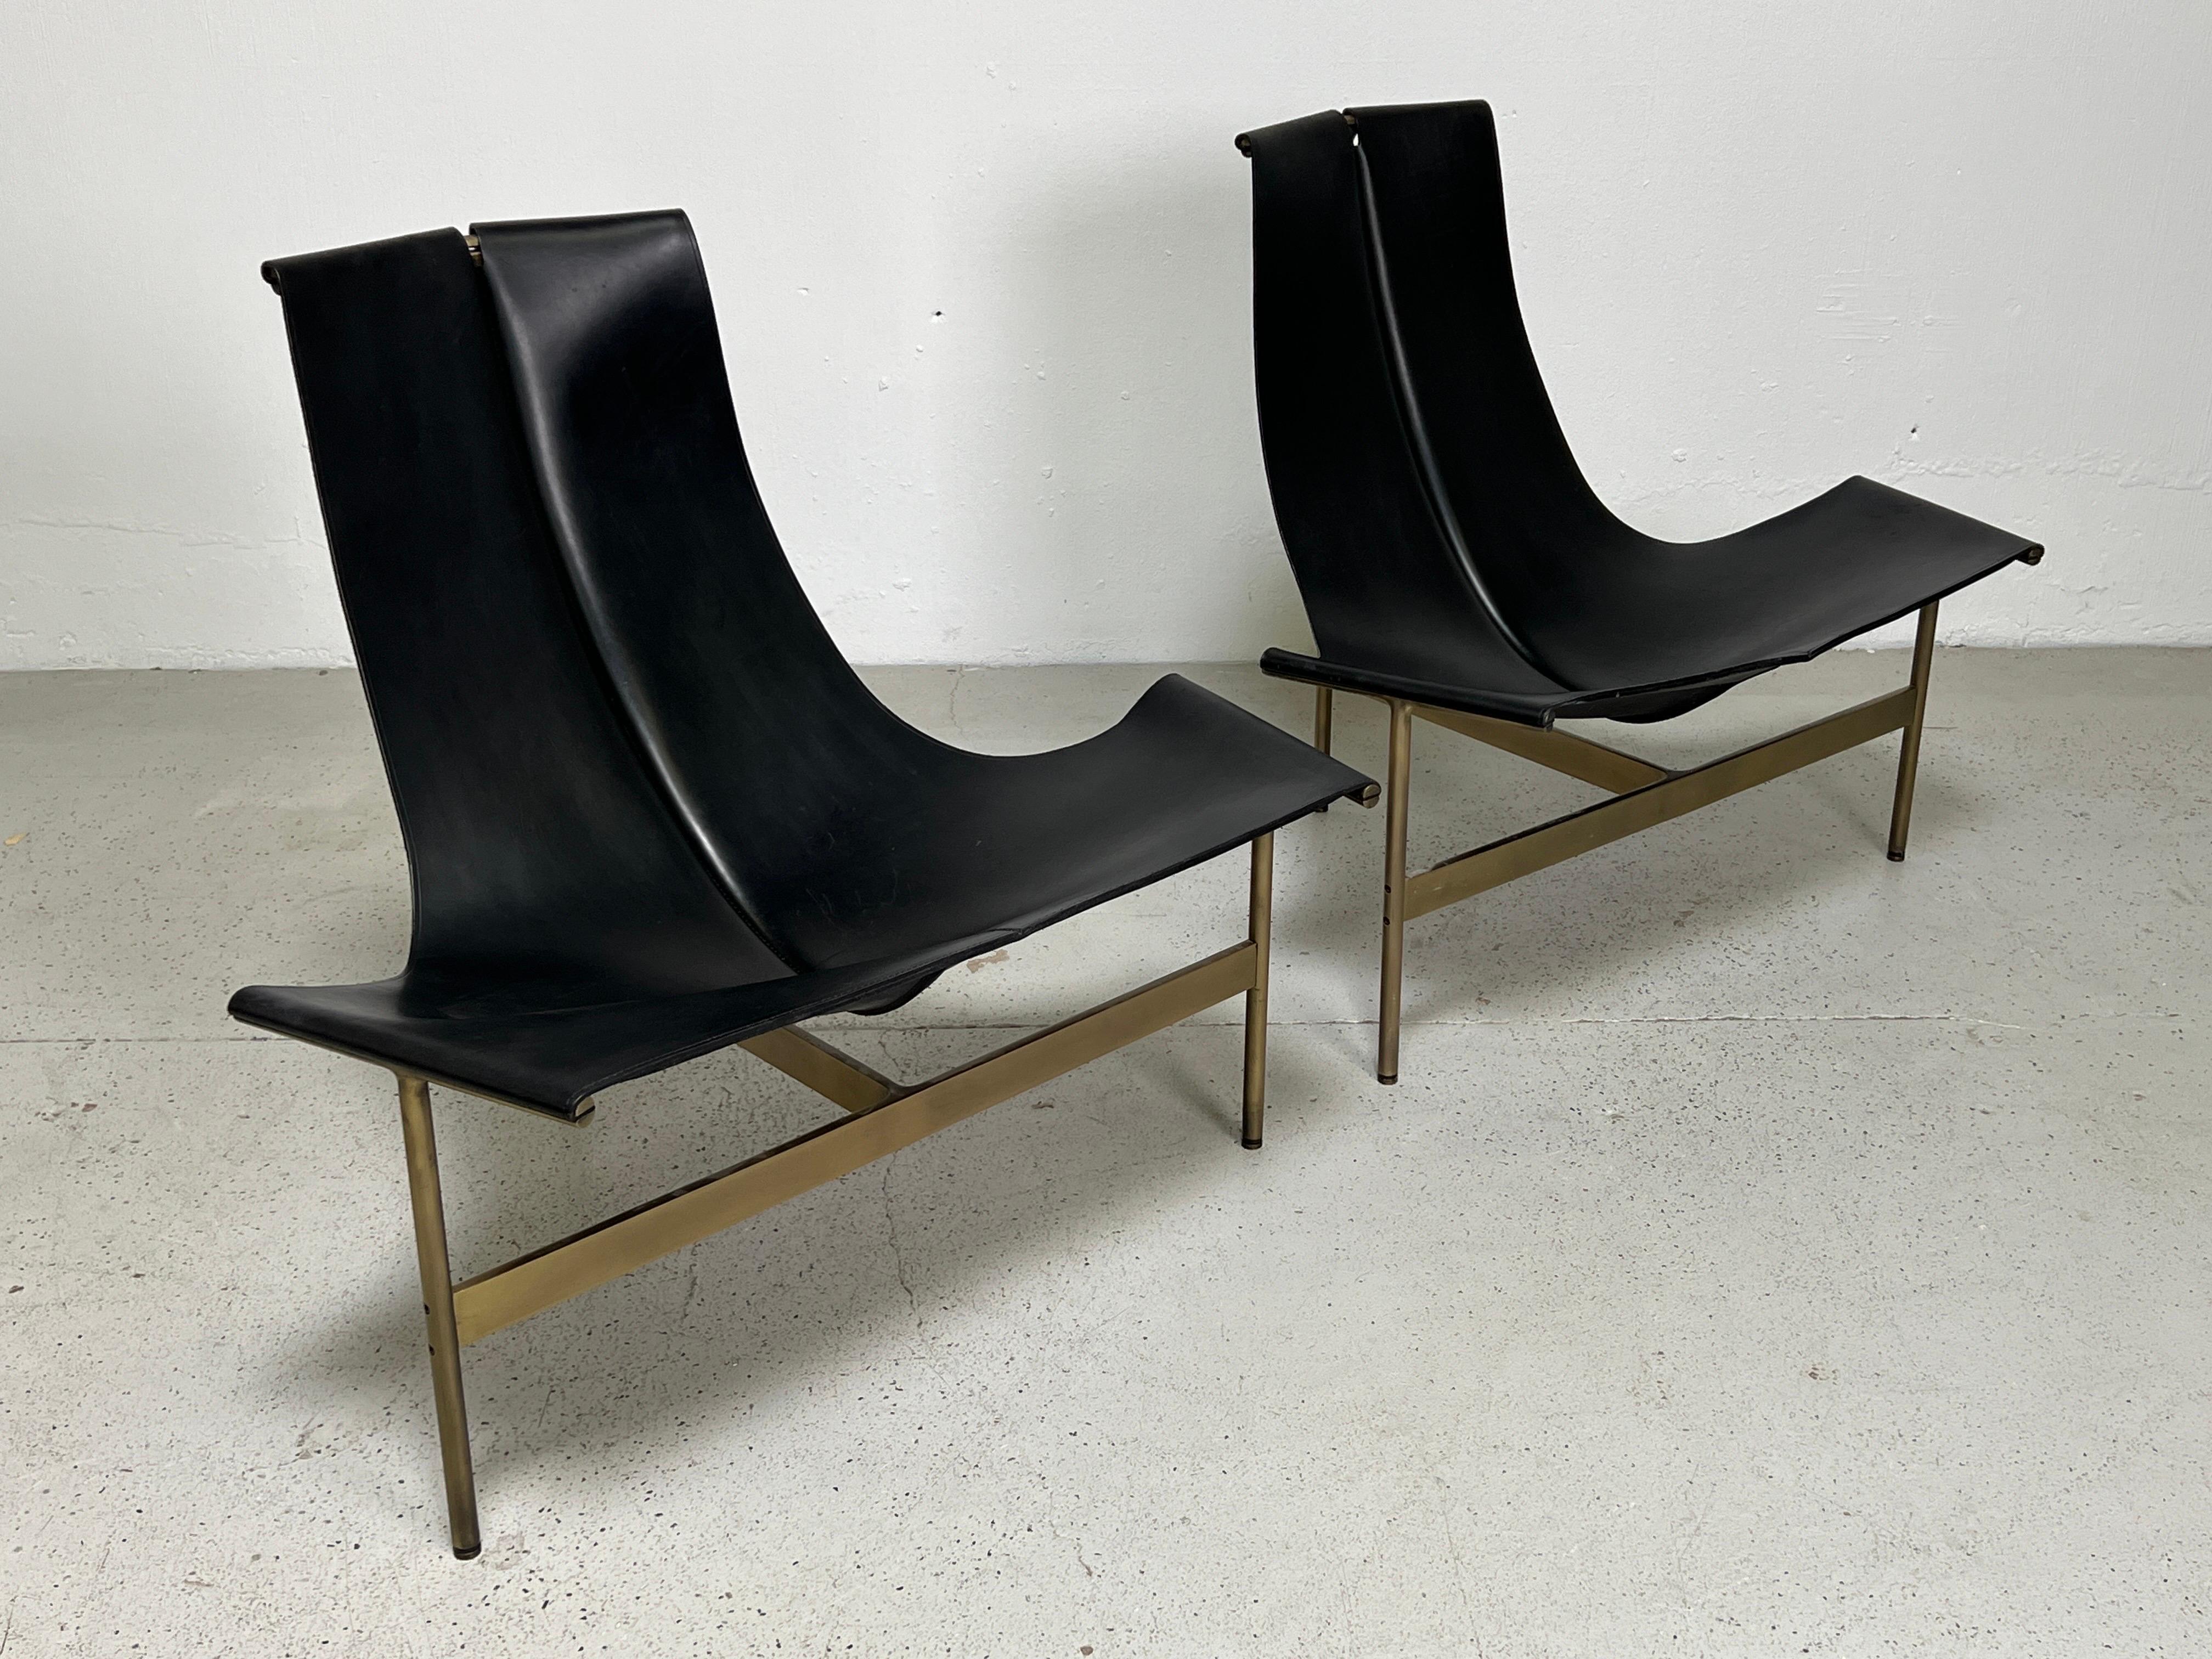 Pair of Bronze TG-15 Lounge Chair by Katavolos, Littell, & Kelley For Sale 6